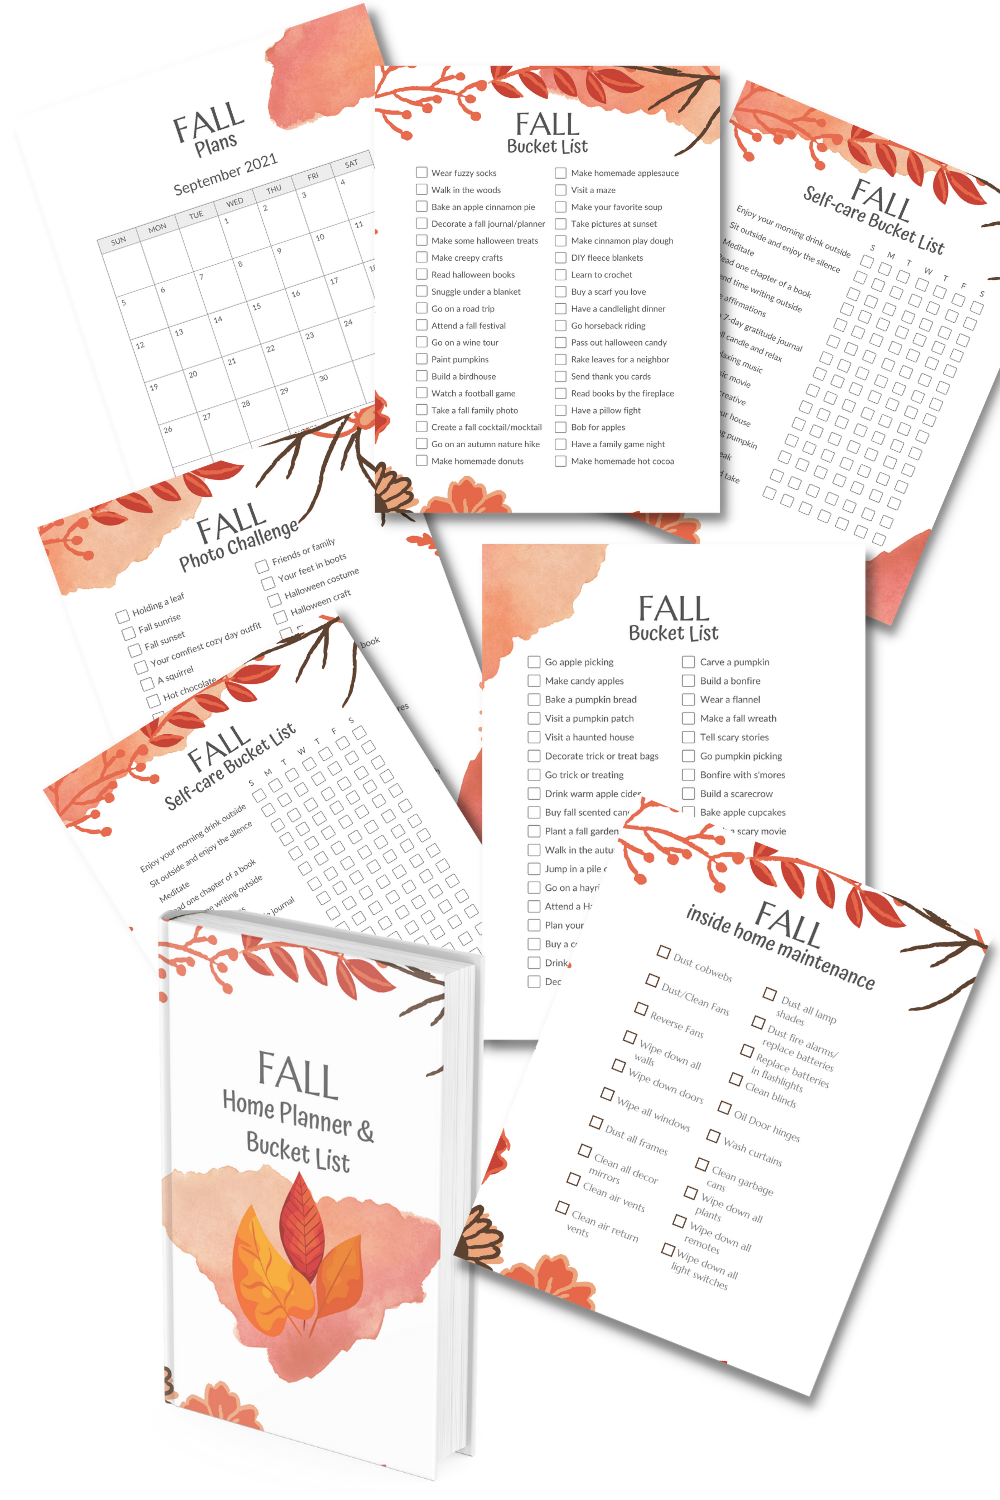 Fall Home Planner, cleaning checklist and Bucket List